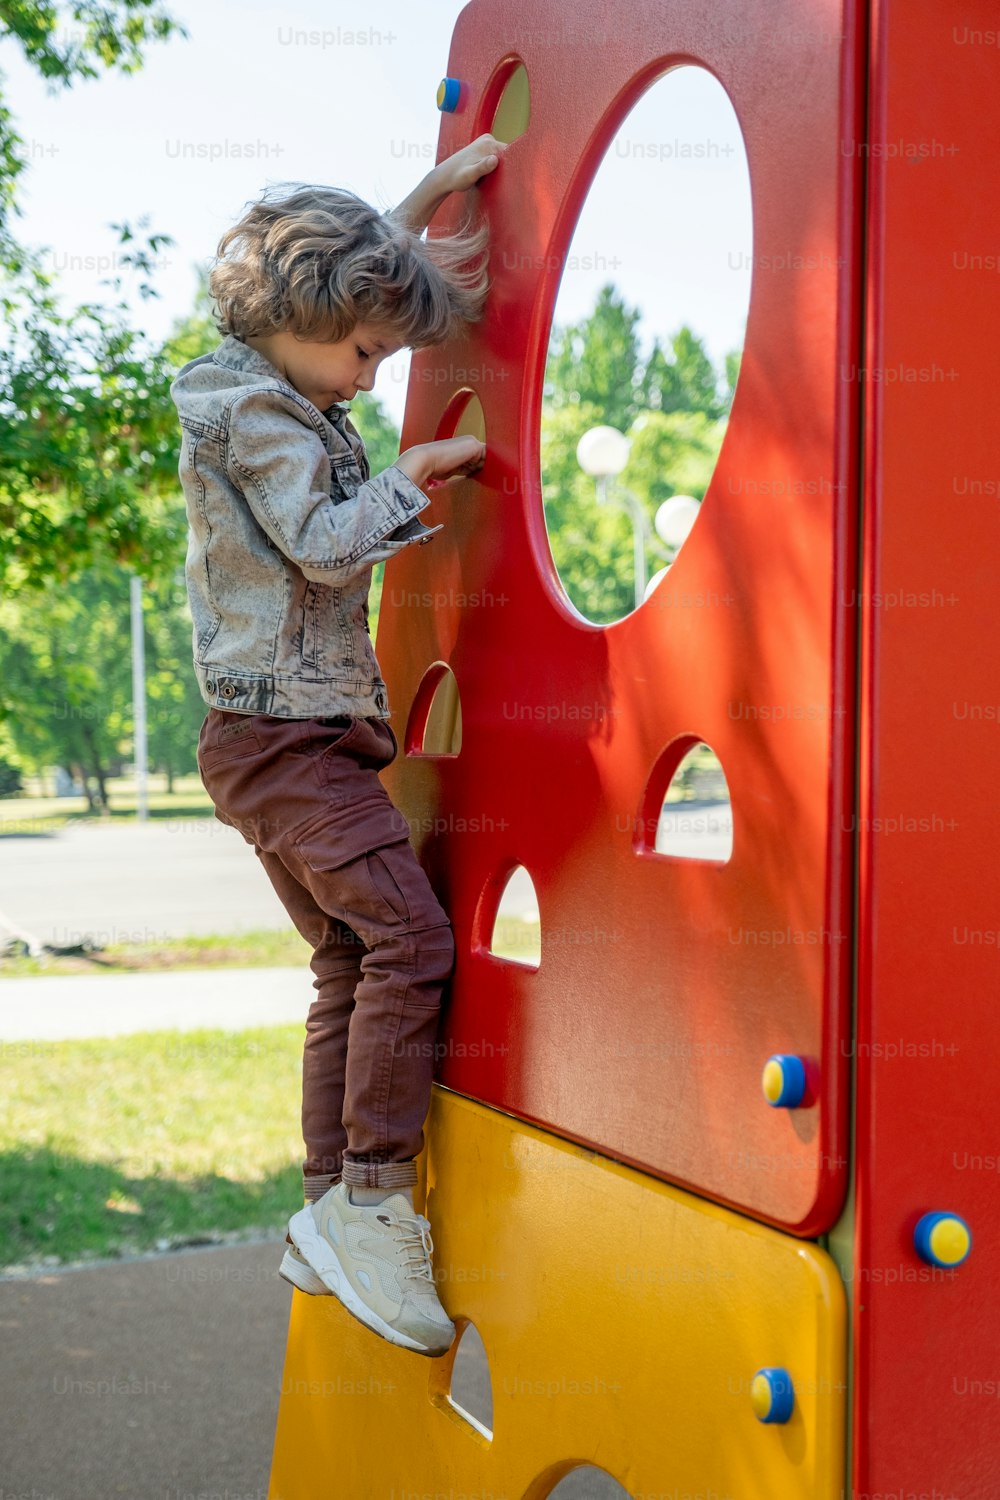 Cute little boy in cross-shoes, denim jacket and pants climbing or descending on leisure facilities for kids in park on summer day